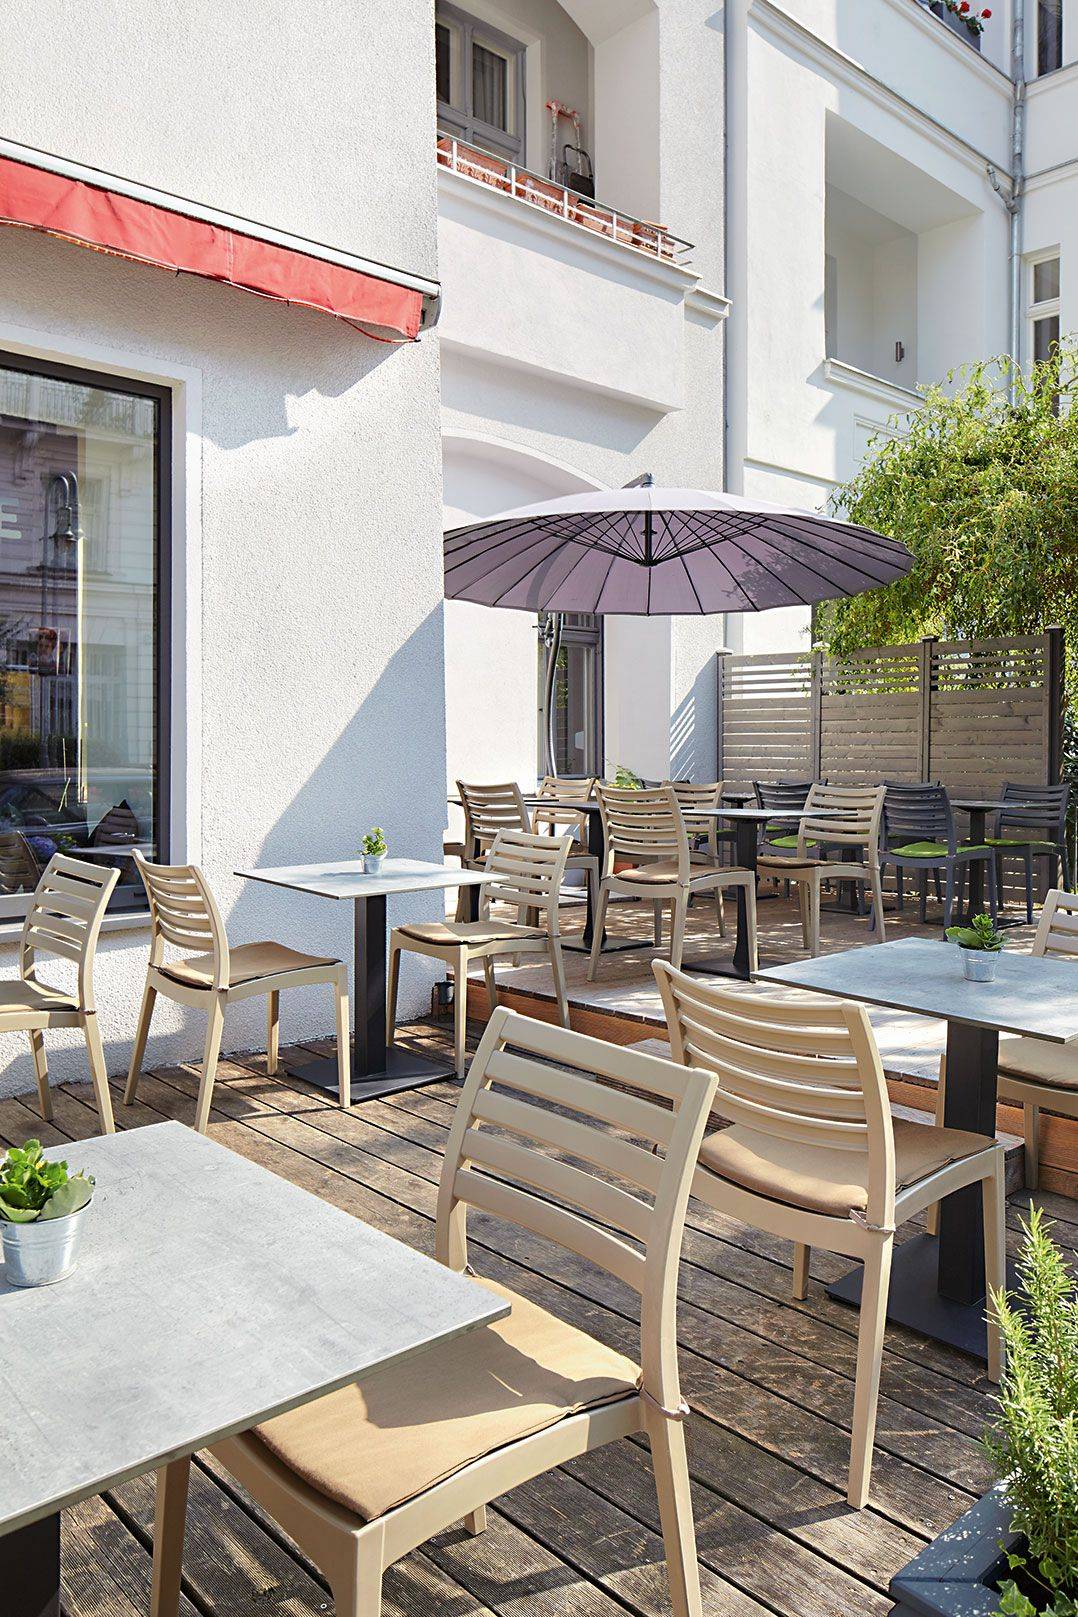 Outdoor Plastic chairs for your restaurant or hotel